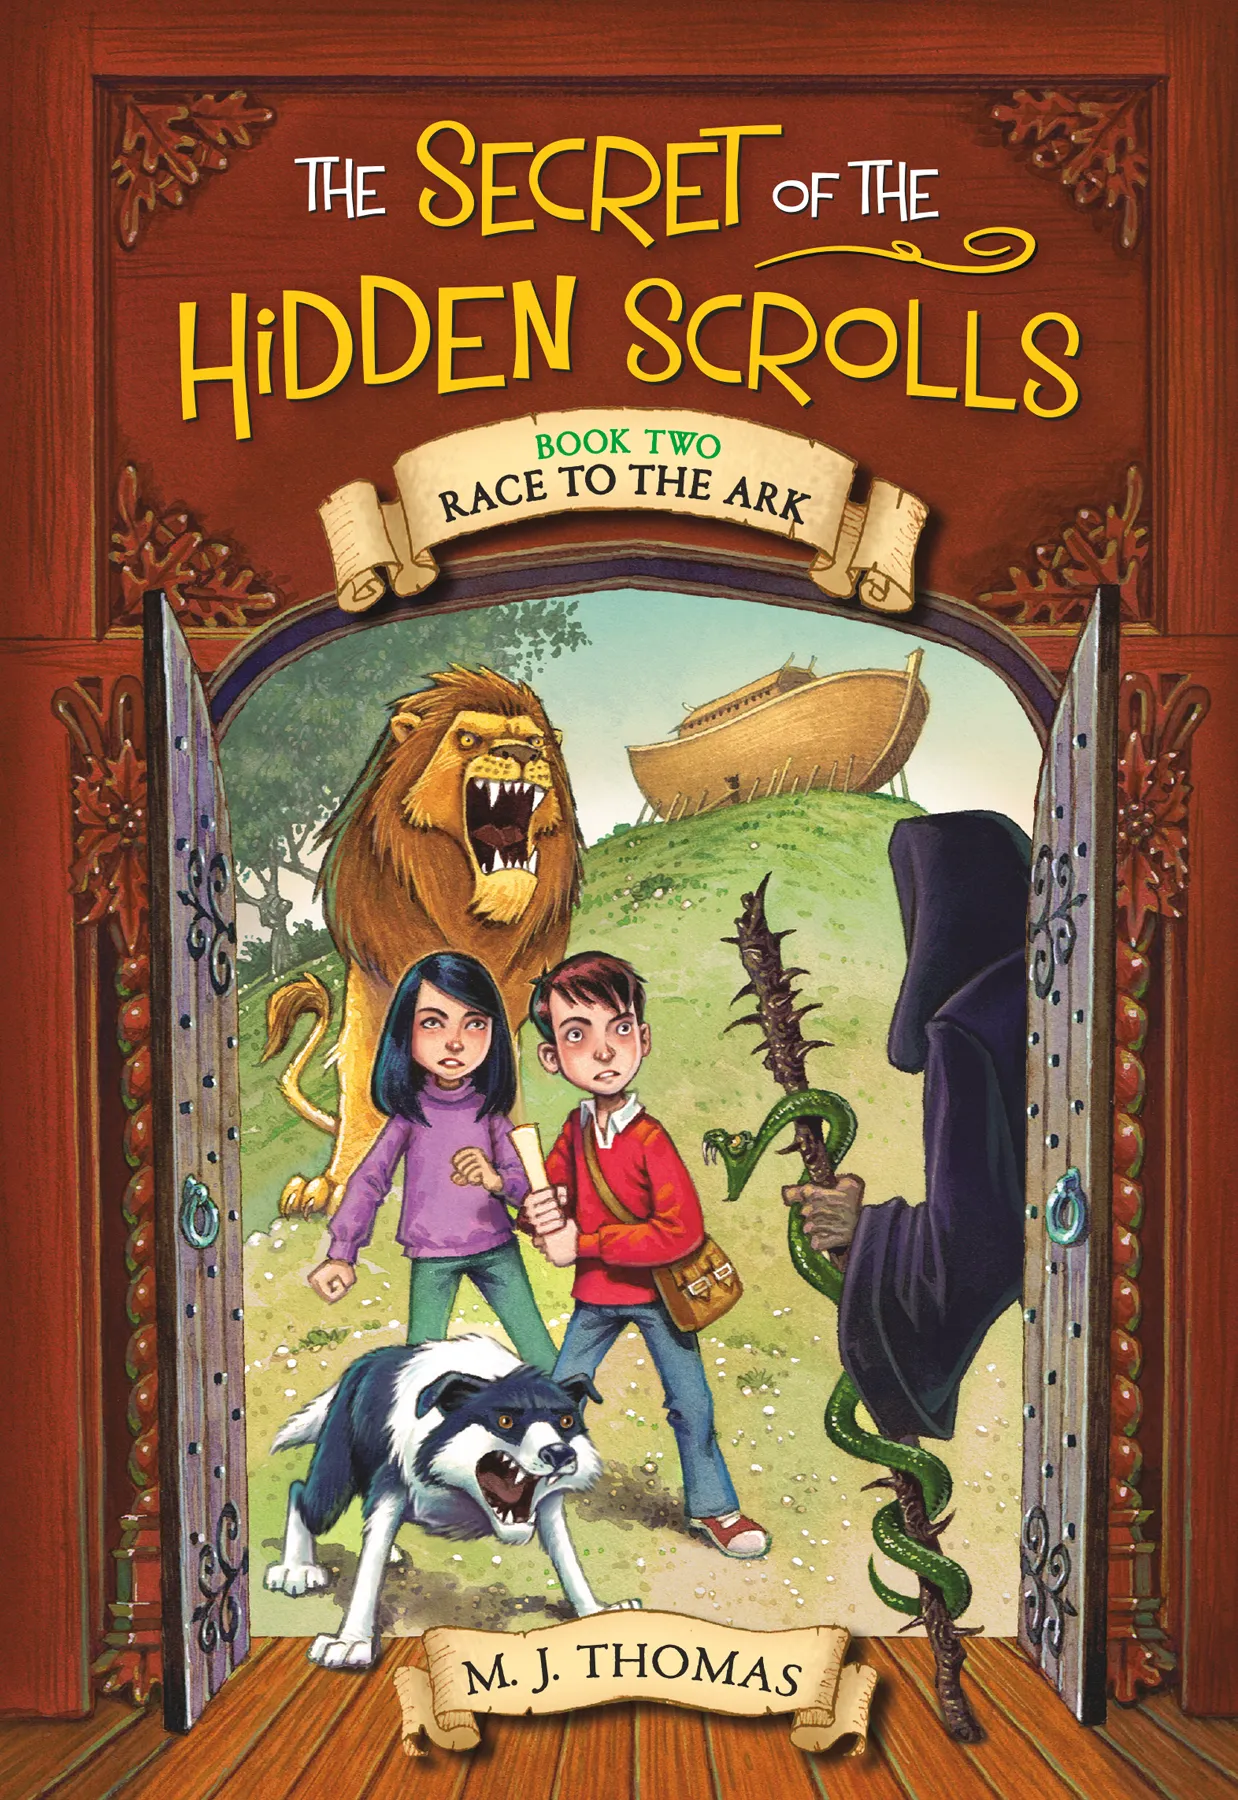 Race to the Ark (The Secret of the Hidden Scrolls #2)